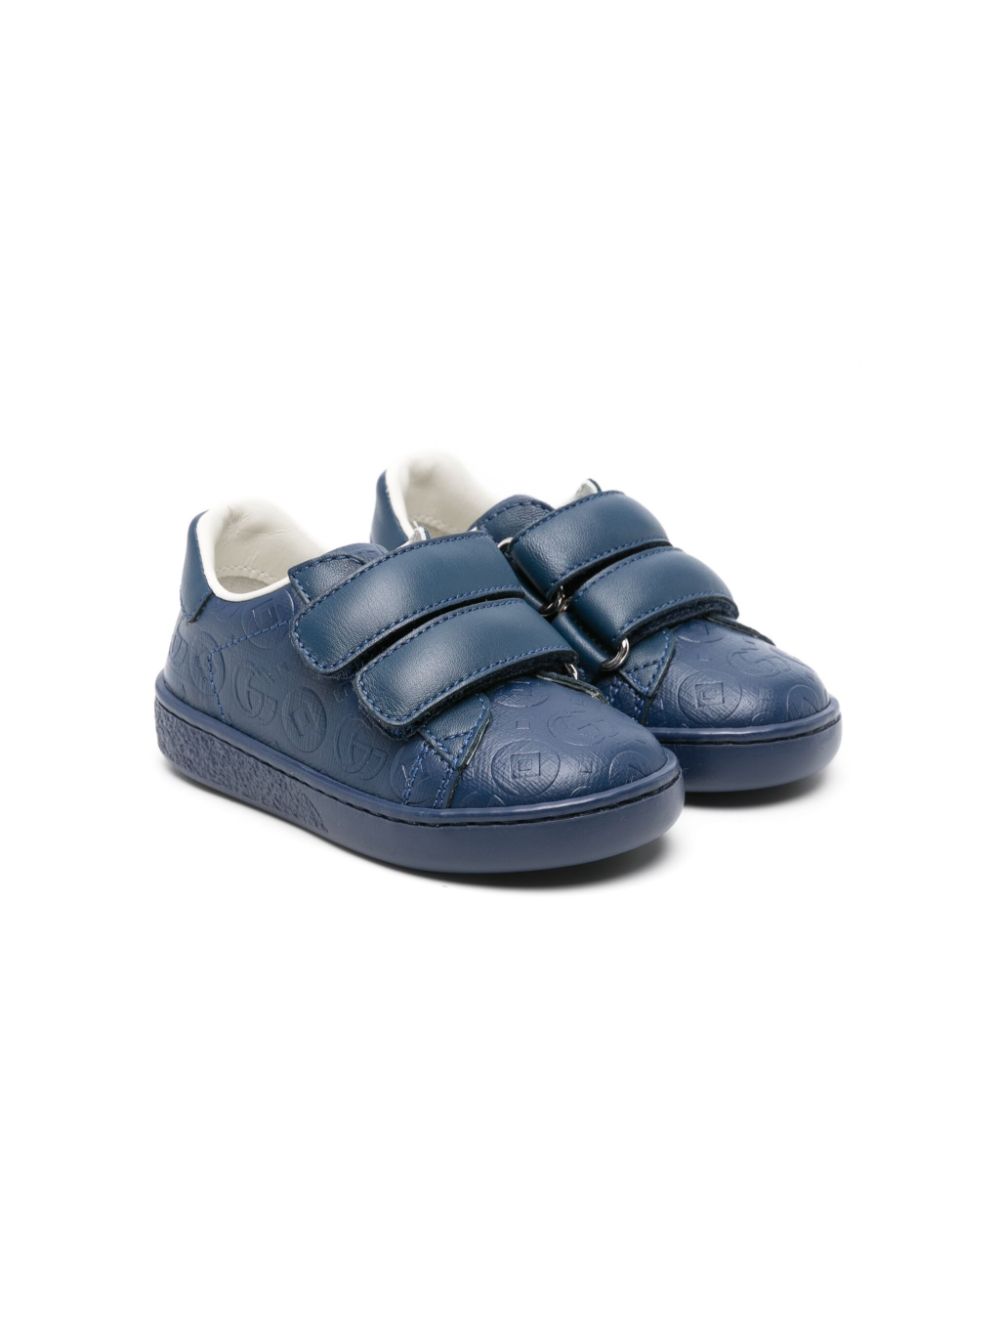 Gucci Kids Double G leather sneakers - Blue von Gucci Kids